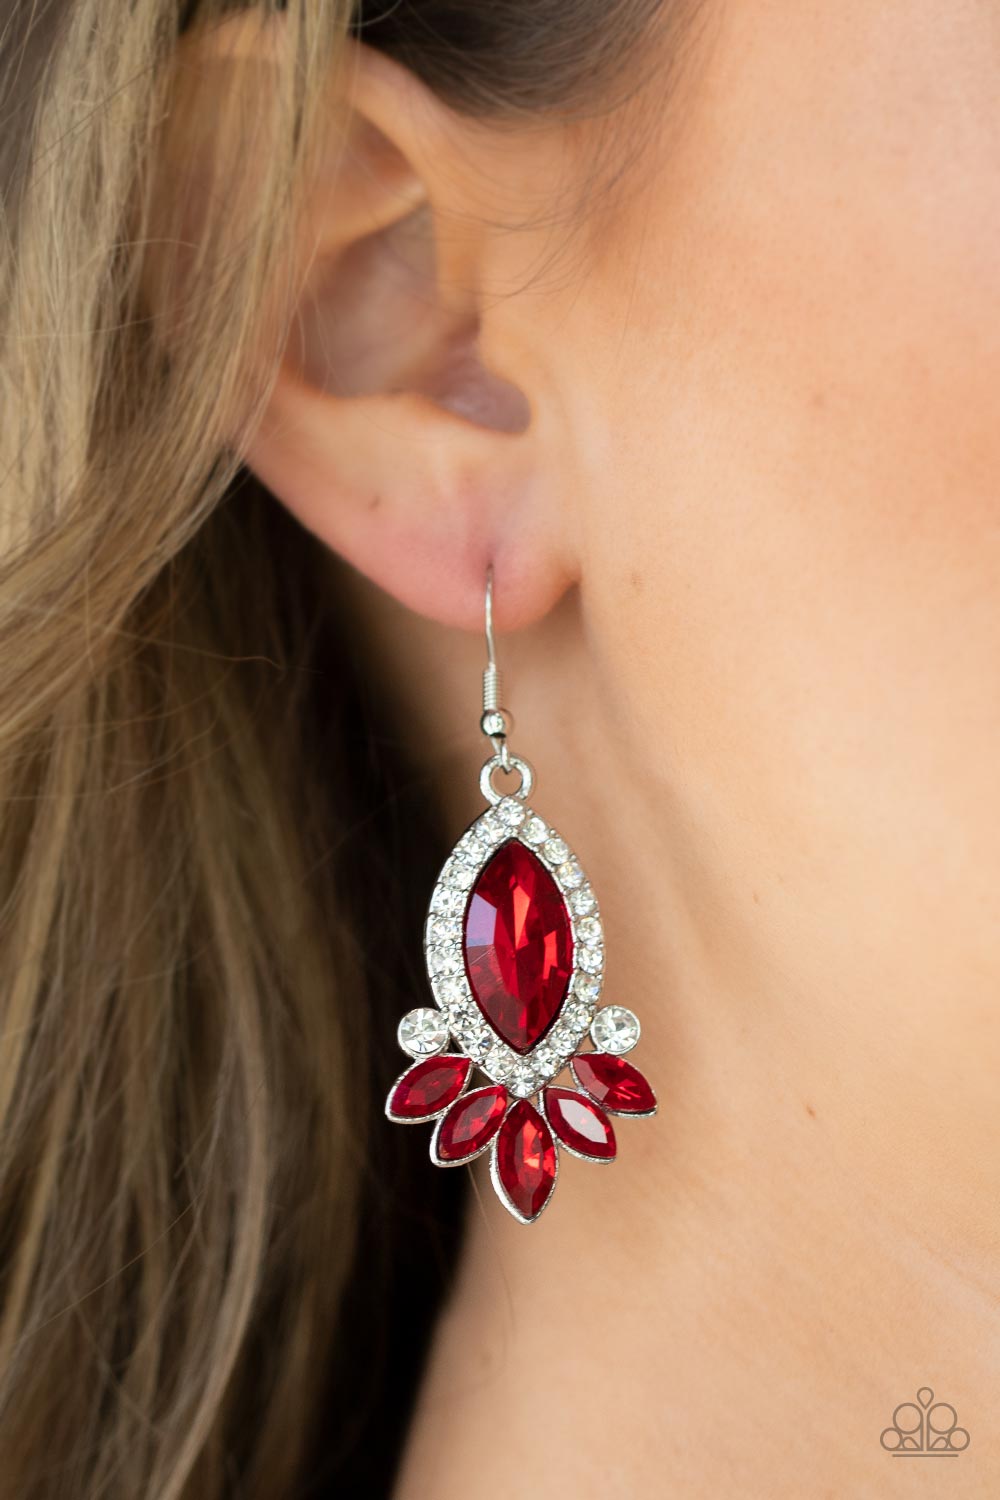 Paparazzi Prismatic Parade - Red Earrings $5 Jewelry online at AainaasTreasureBox. #P5RE-RDXX-156XX